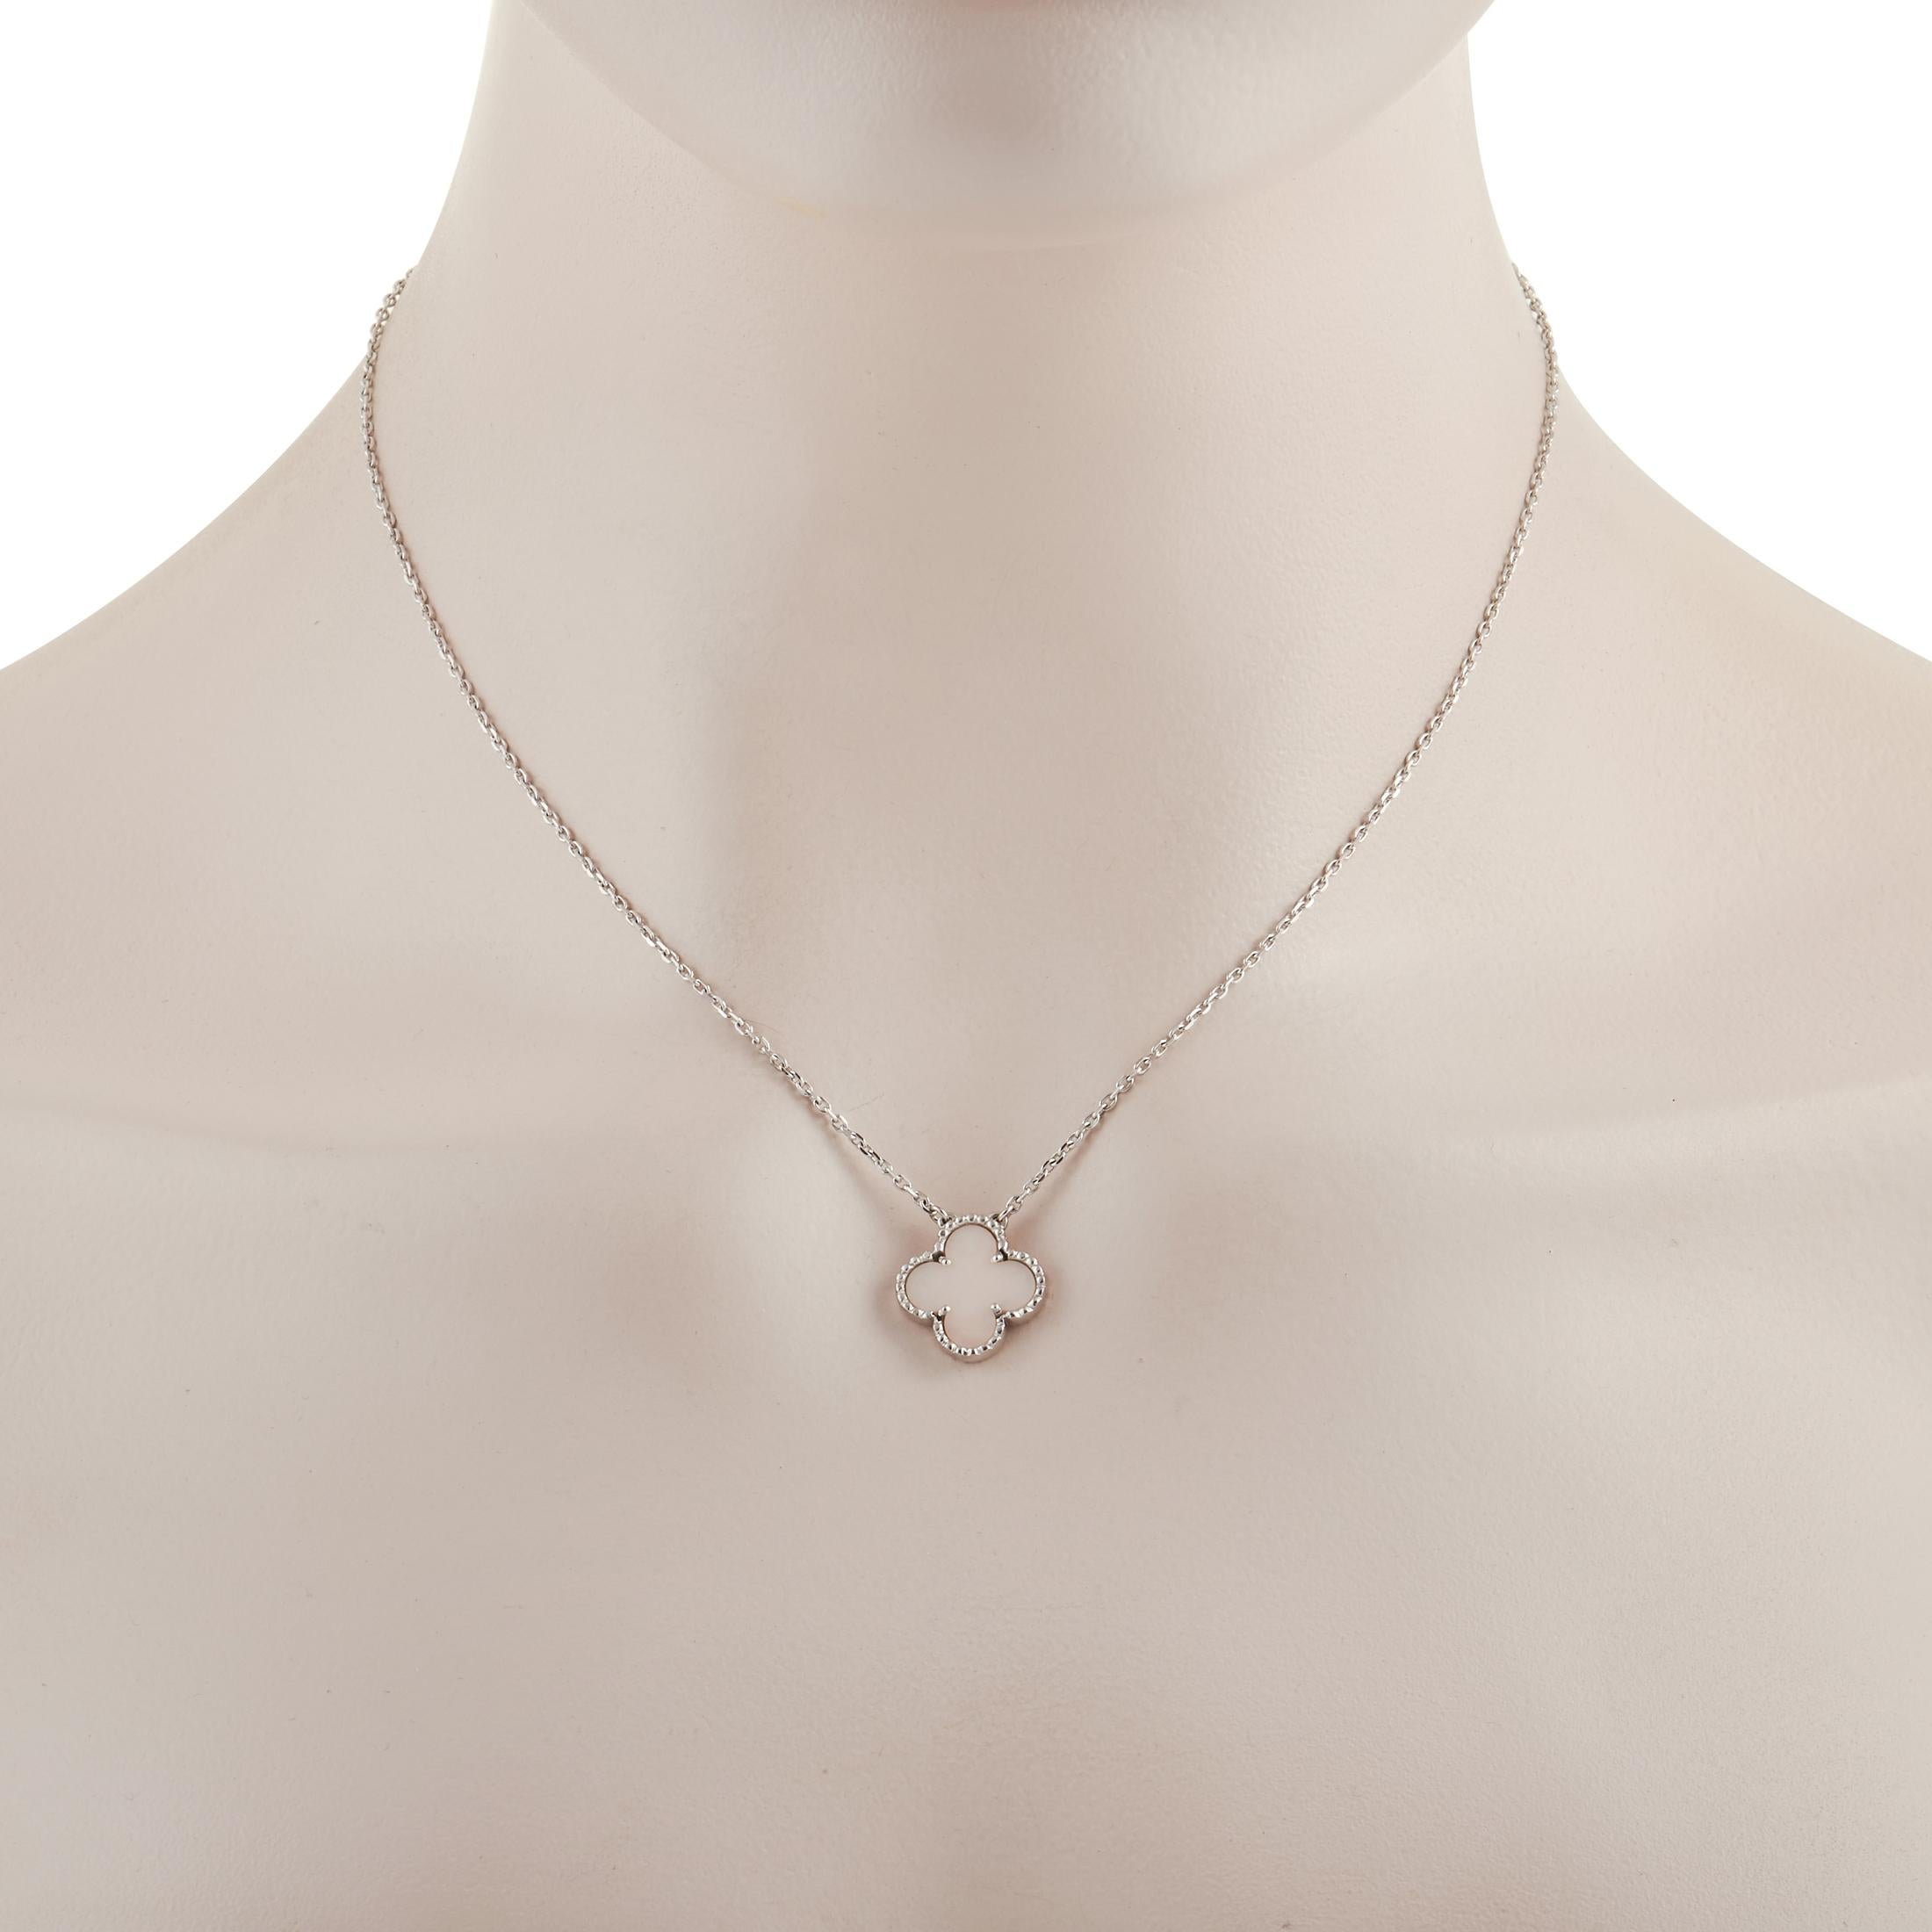 The iconic clover makes a stylish statement on this Van Cleef & Arpels Alhambra pendant necklace. Opulent pink opal elevates the center of the pendant, which measures .5” round. You’ll also find opulent 18K White Gold on the 16” chain and millegrain